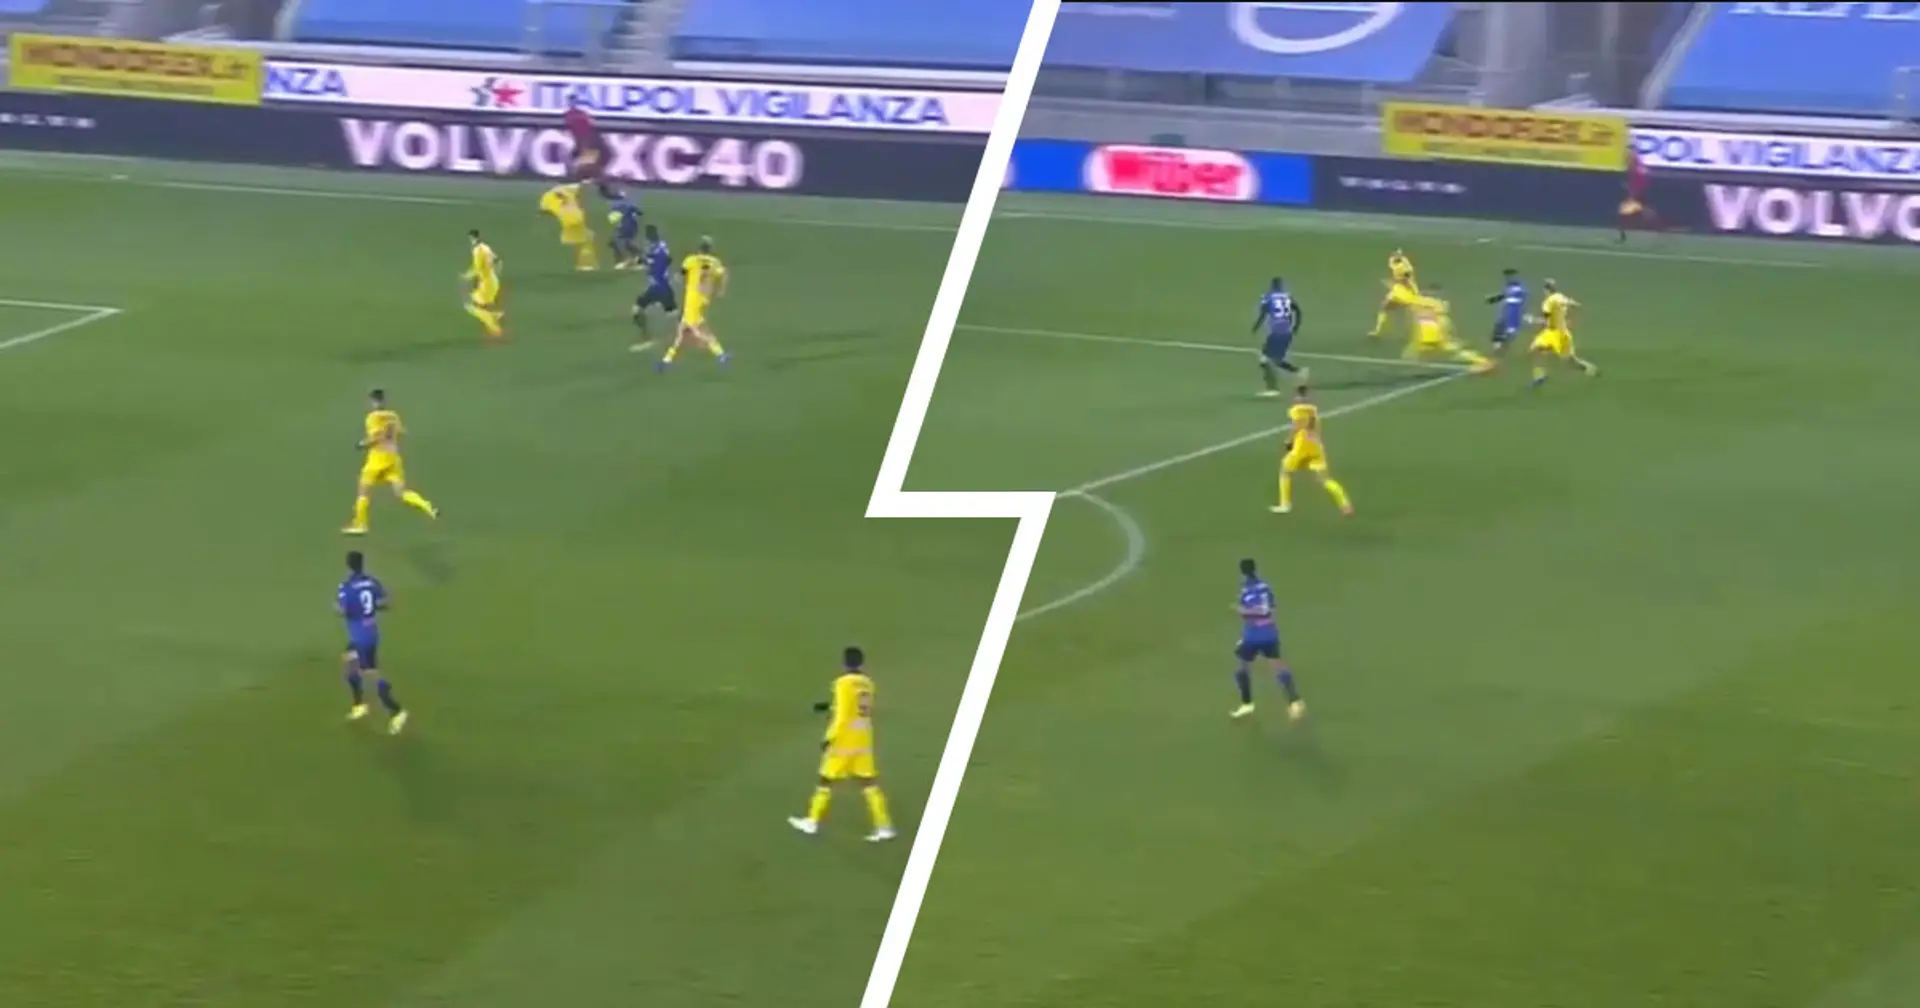 Amad Diallo outwits multiple defenders with brilliant skill against Hellas Verona